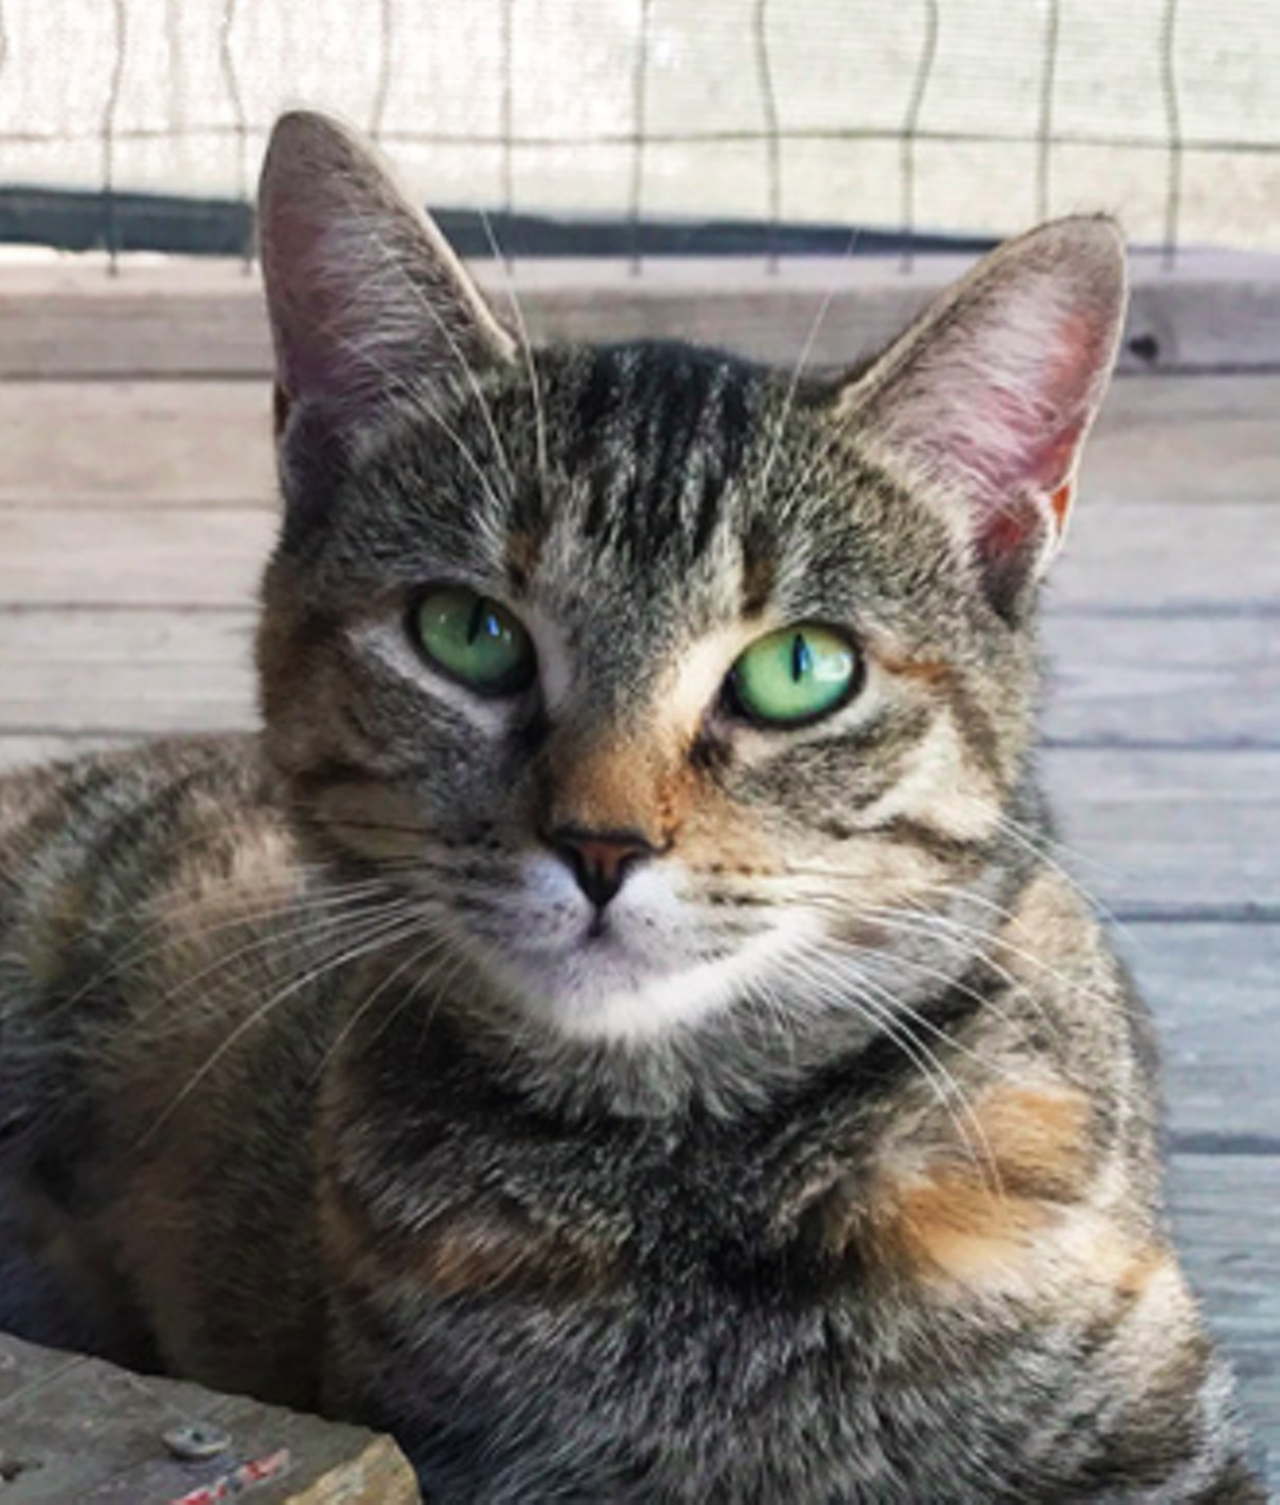 DisneyHi, I’m Disney. I was brought to ADL from Best Friends Animal Society who was working with ADL to transfer Hurricane Harvey pets into the shelter. Now I’m here and ready to find my forever home. I am a nervous kitty! Please go slow with me when we meet. I’m waiting for a special person who’ll give a shy kitty like me a chance to be loved forever. If you think you can be that special person for me, then please consider giving me a chance!